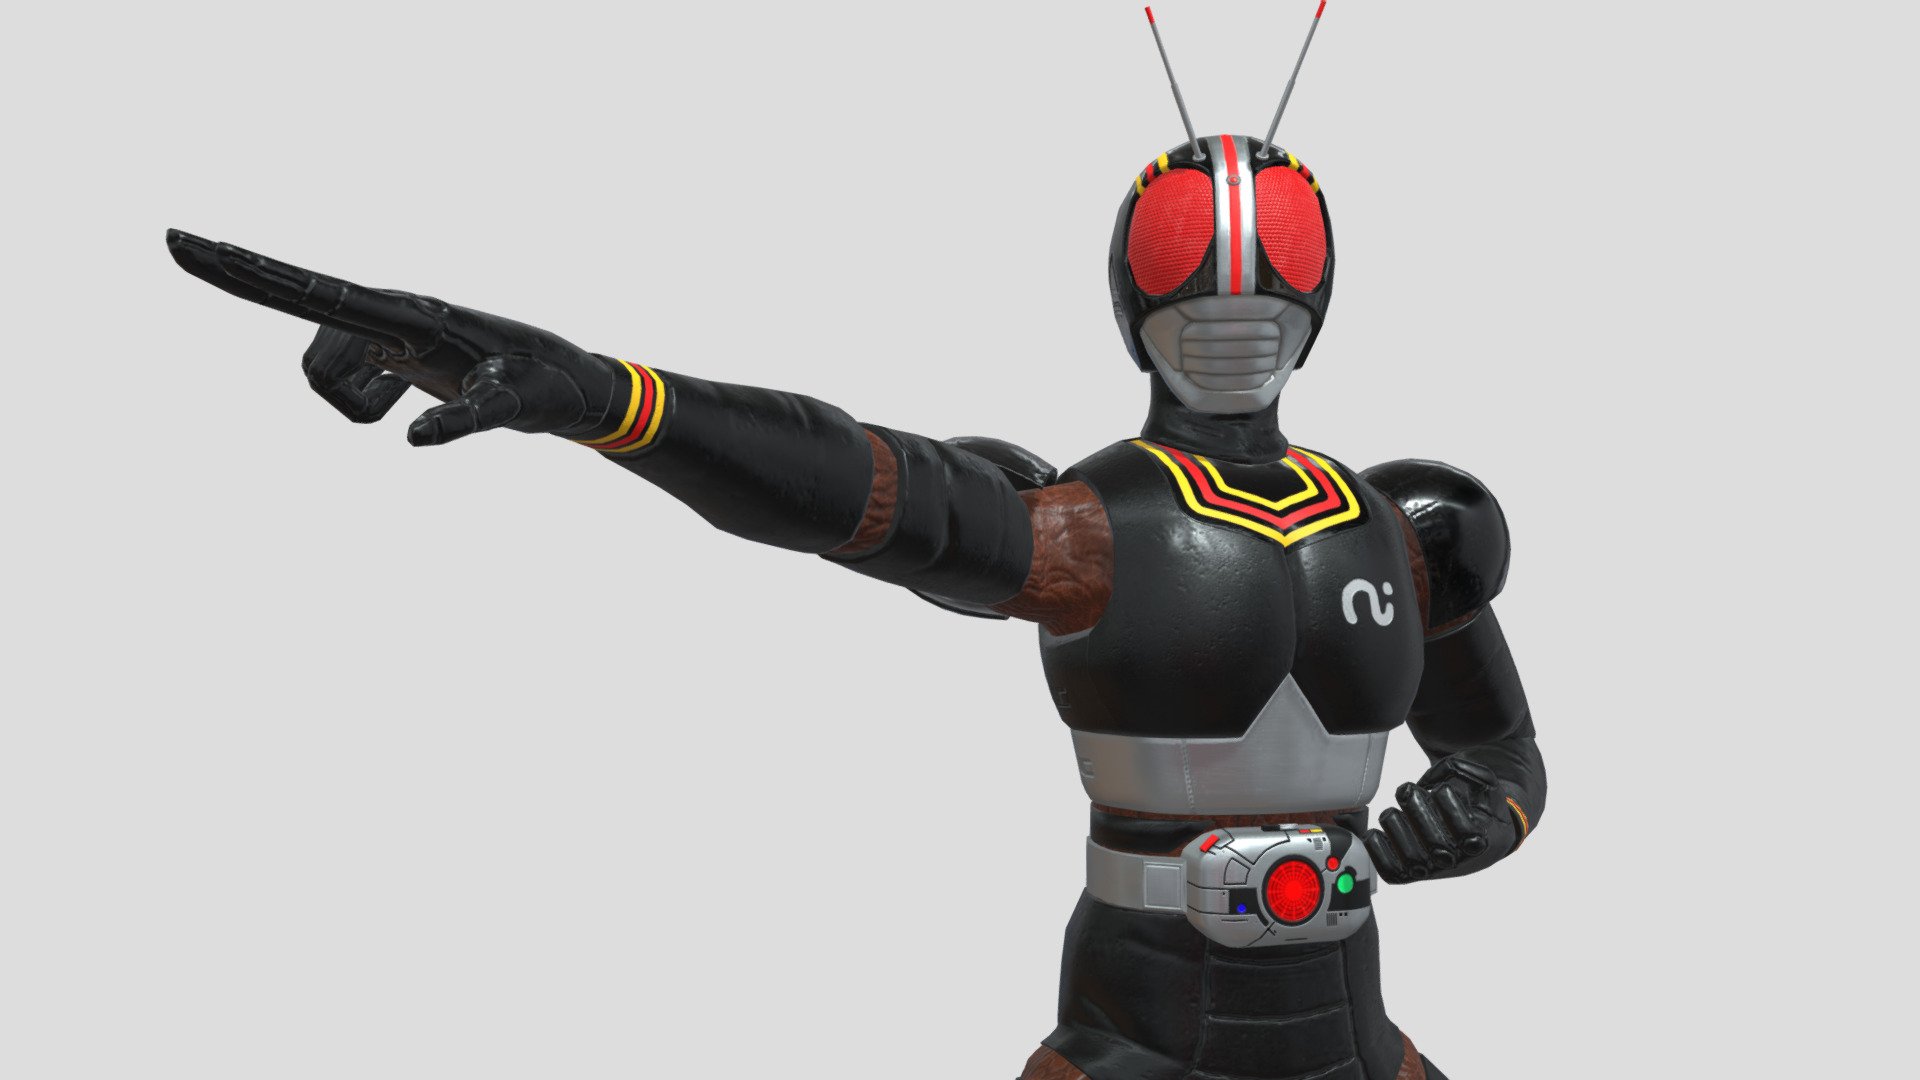 Kamen Rider BLACK from the 1988 Japanese tokusatsu series of the same name, low poly, made in 2018 for my first demo reel 3d model